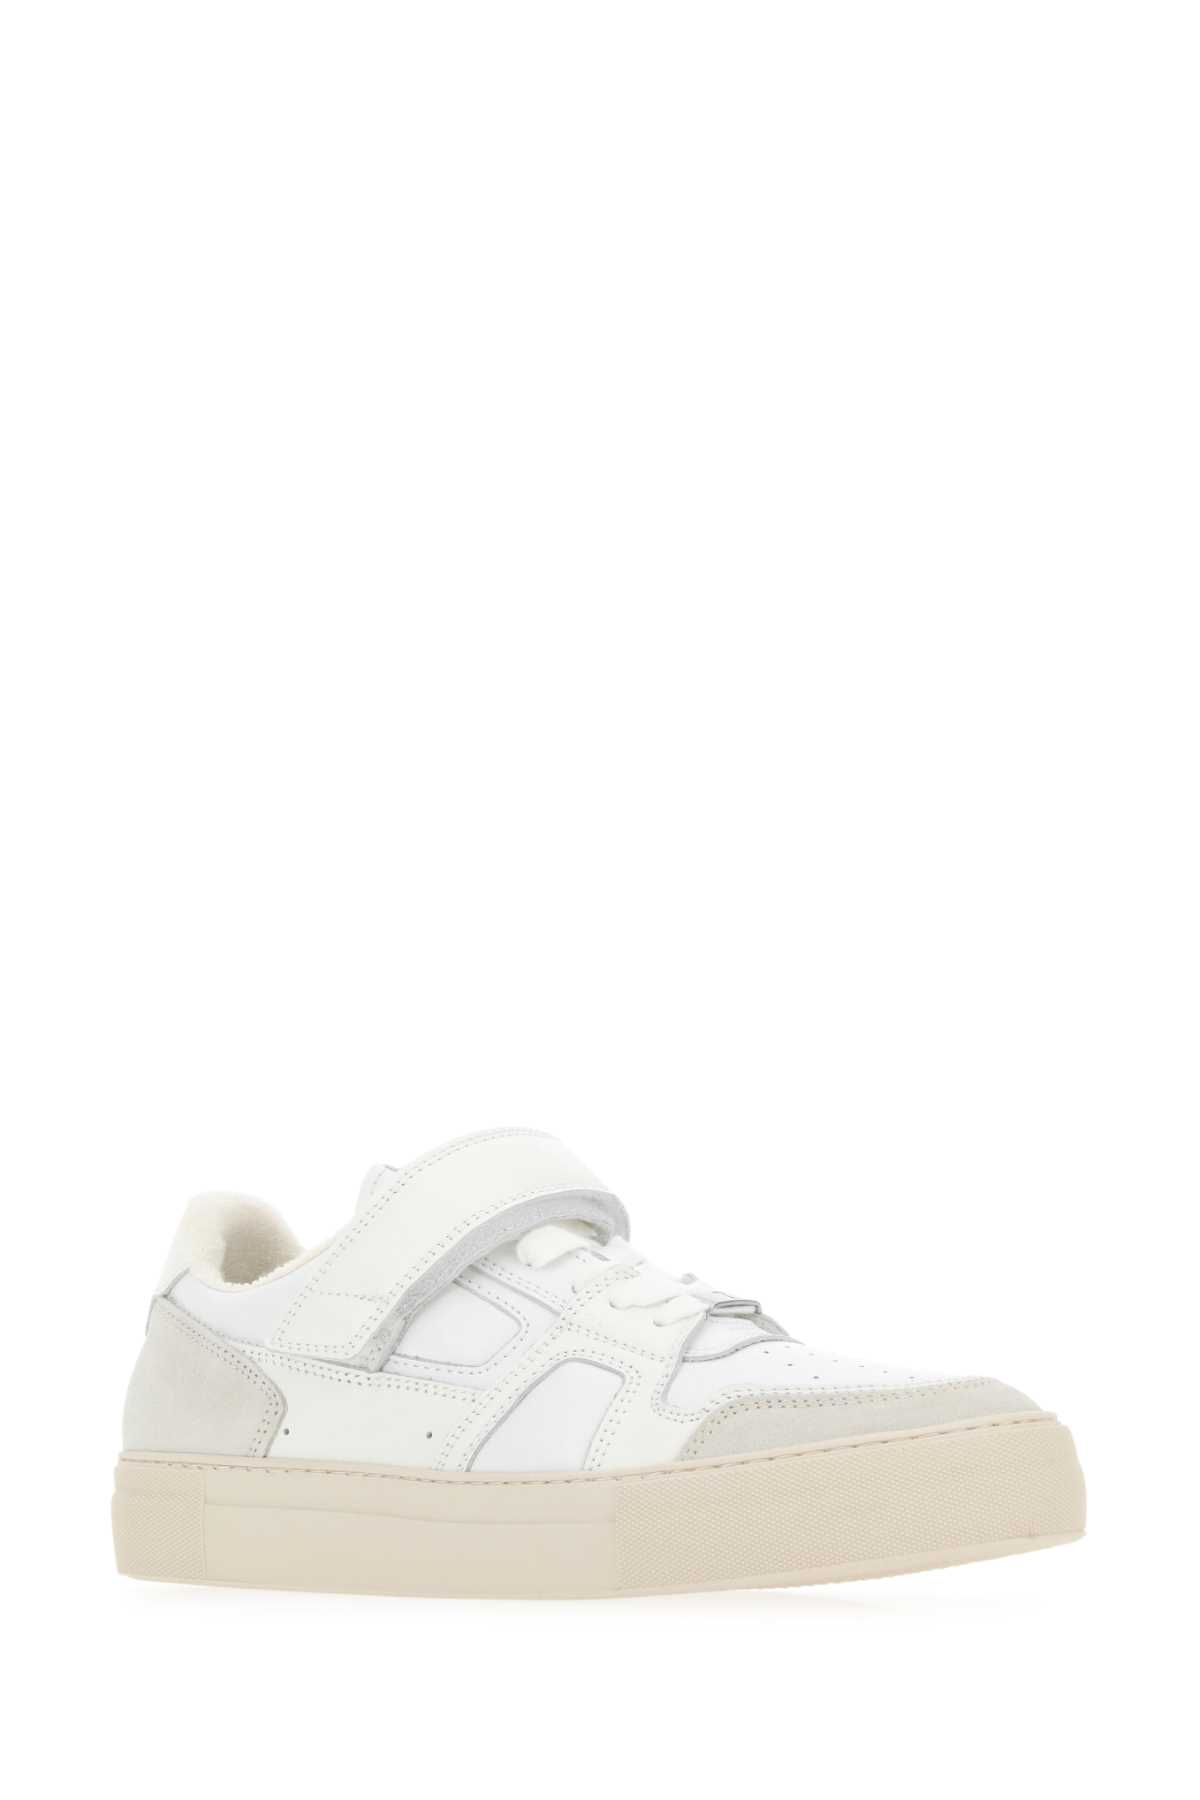 Ami Alexandre Mattiussi Two-tone Leather And Suede Ami Arcade Trainers In 107